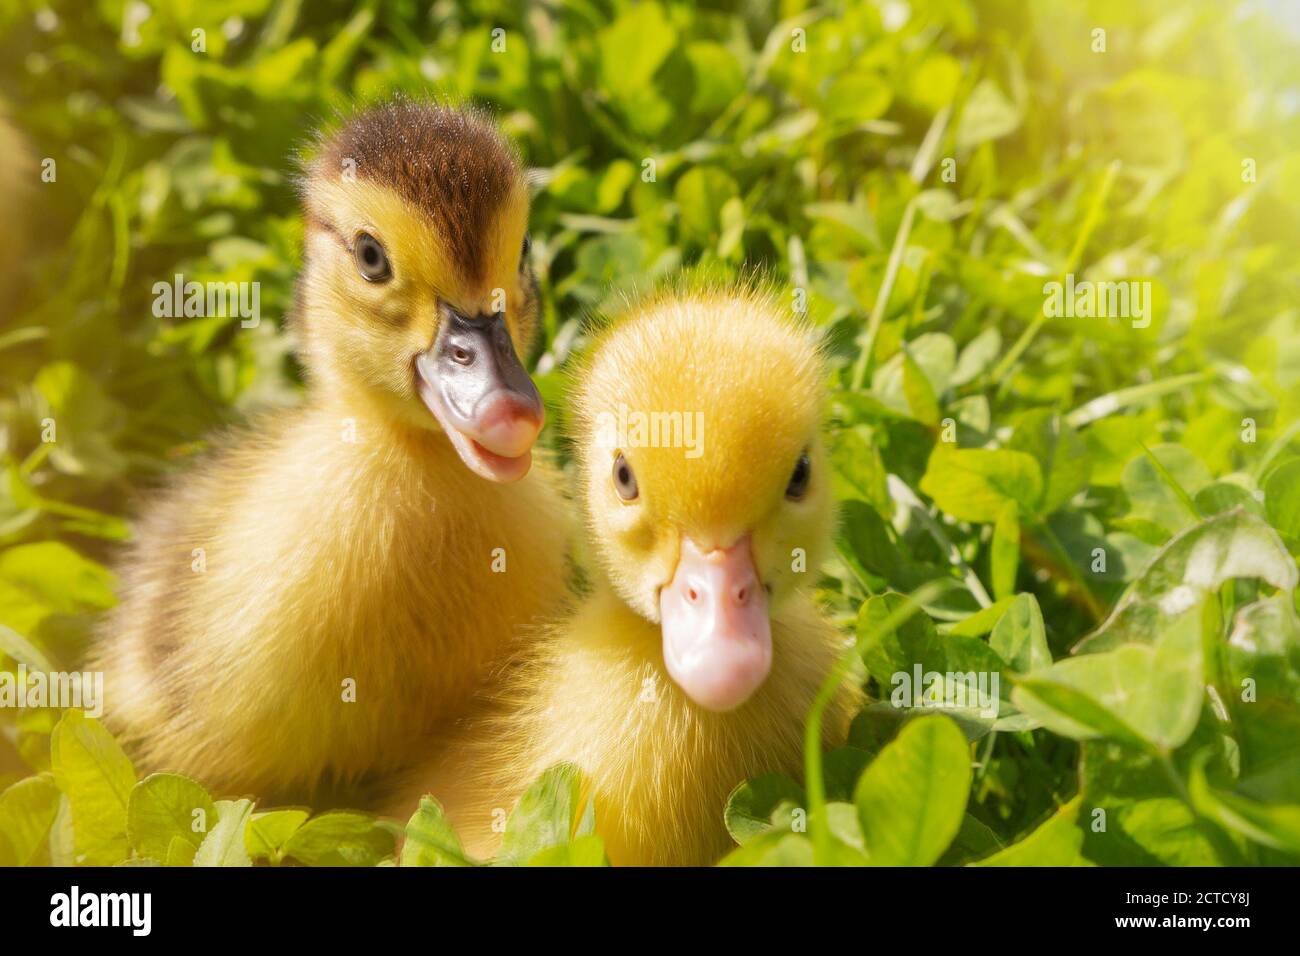 The head of a cute little newborn Yellowhead in green grass. Two ducks have just hatched. Stock Photo